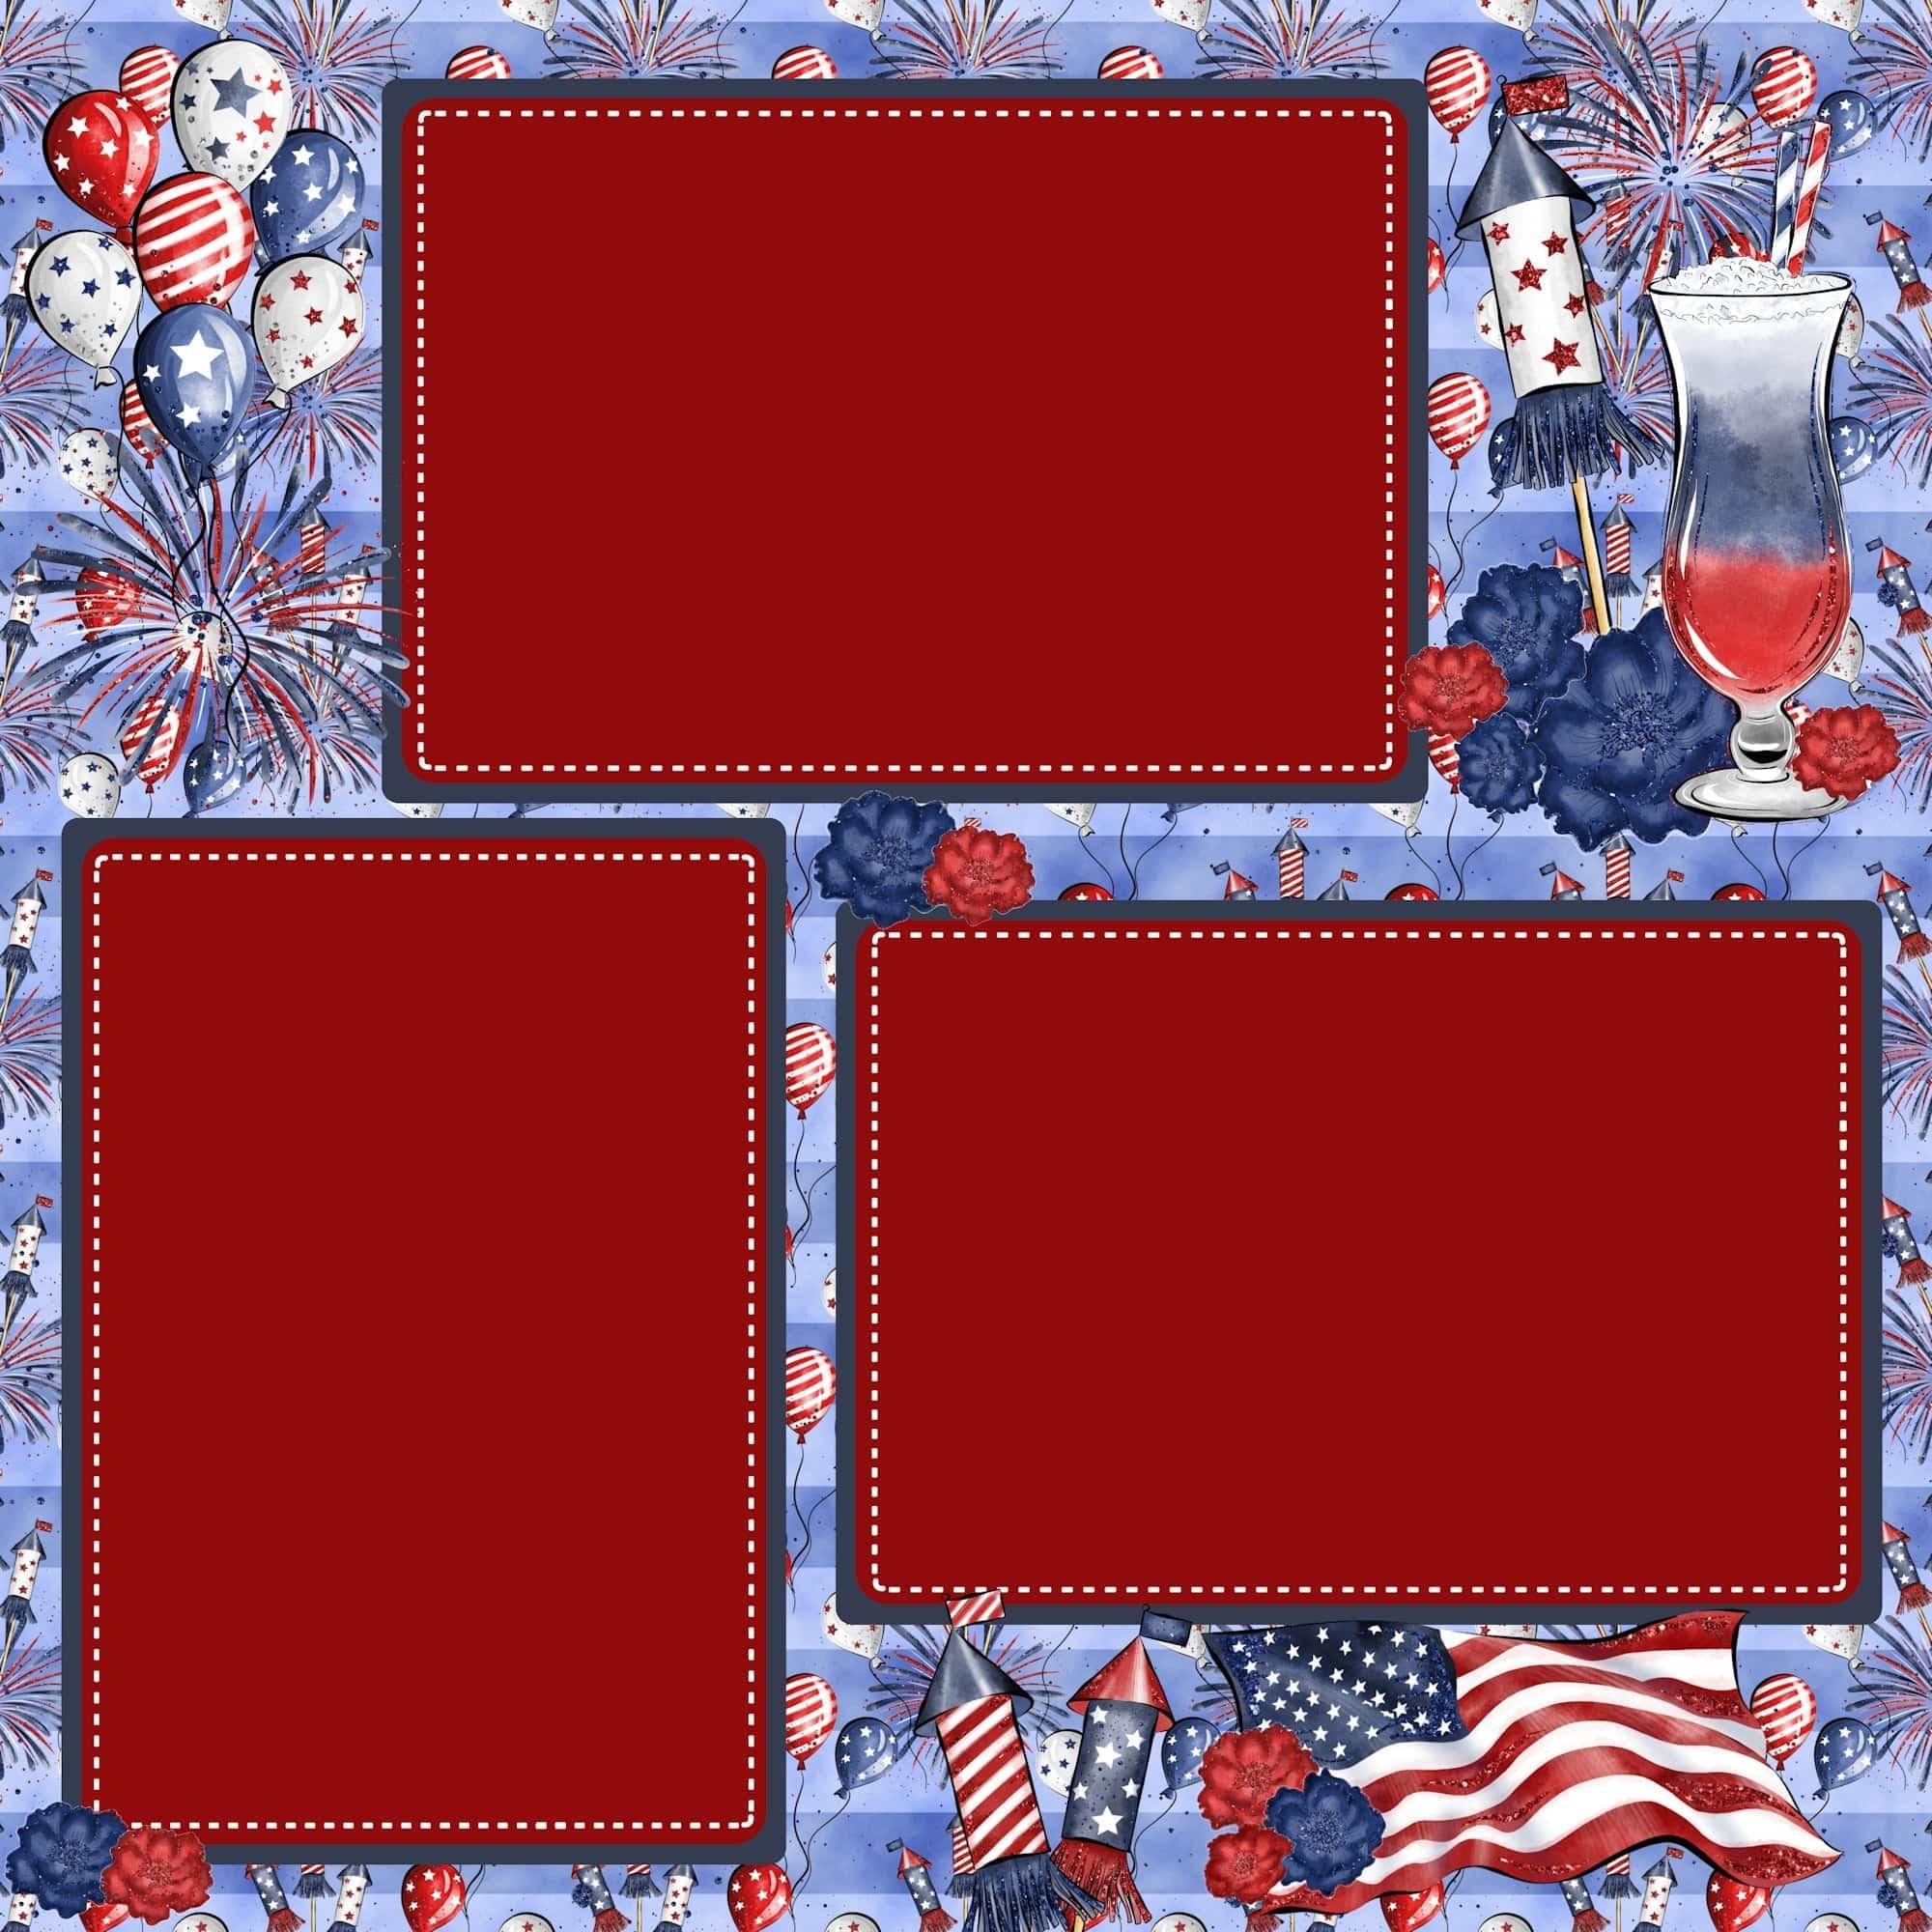 Lady Liberty Fireworks (2) - 12 x 12 Premade, Printed Scrapbook Pages by SSC Designs - Scrapbook Supply Companies